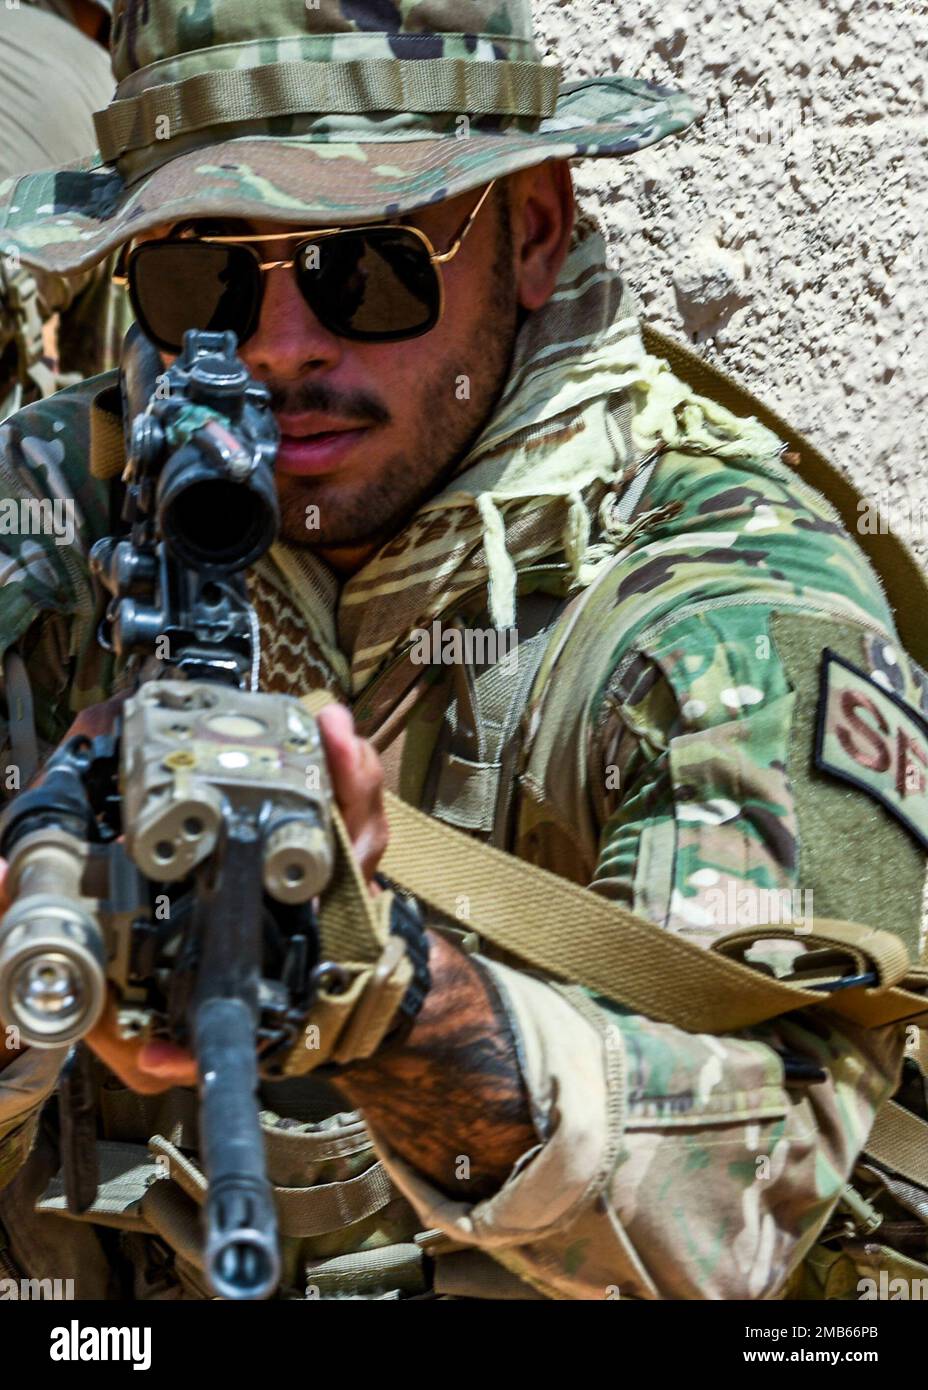 U.S. Air Force Staff Sgt. Alejandro Bachelier,  assigned to the 378th Expeditionary Security Forces Squadron, holds security for Royal Saudi Land Force soldiers and U.S. Soldiers assigned to Task Force Hurricane, during a training exercise in Al-Kharj, Kingdom of Saudi Arabia, June 12, 2022. Eight USAF Defenders were invited by the U.S. Army to attend Task Force Hurricane’s platoon immersion course alongside the Royal Saudi Land Force. The immersion allowed the 378th ESFS members a chance to develop as multi-capable Airmen by learning both Joint Force infantry tactics and Partner Nation infant Stock Photo